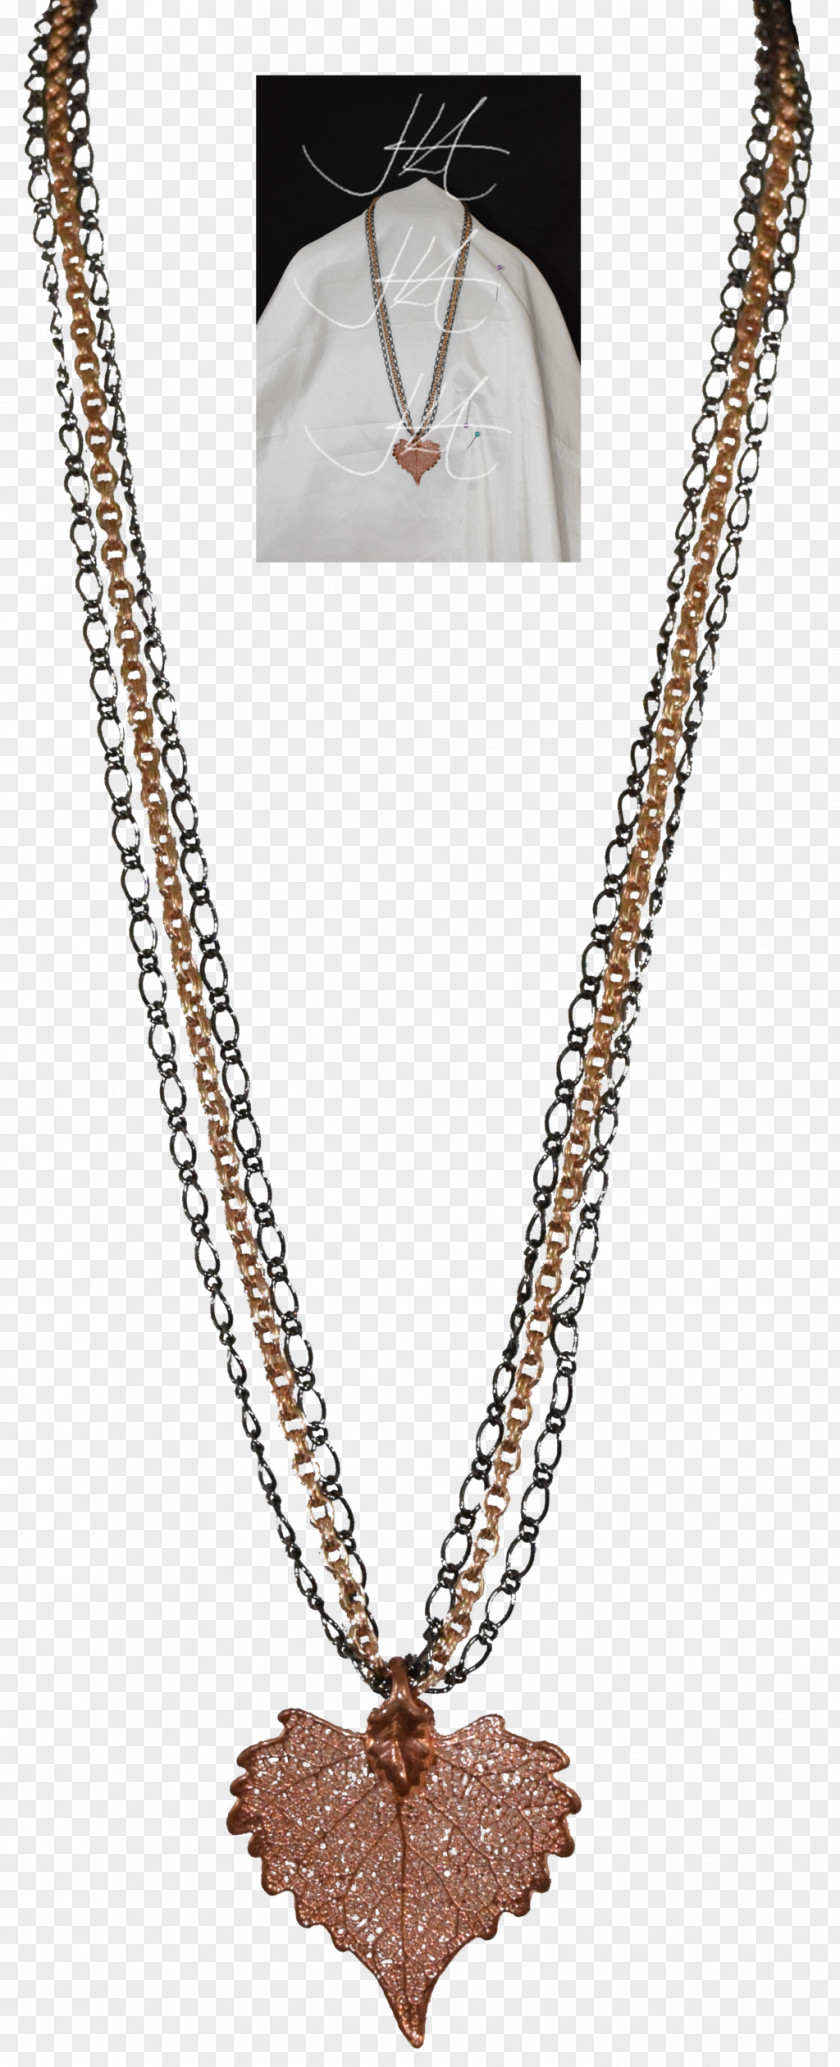 NECKLACE Jewellery Necklace Charms & Pendants Clothing Accessories Chain PNG